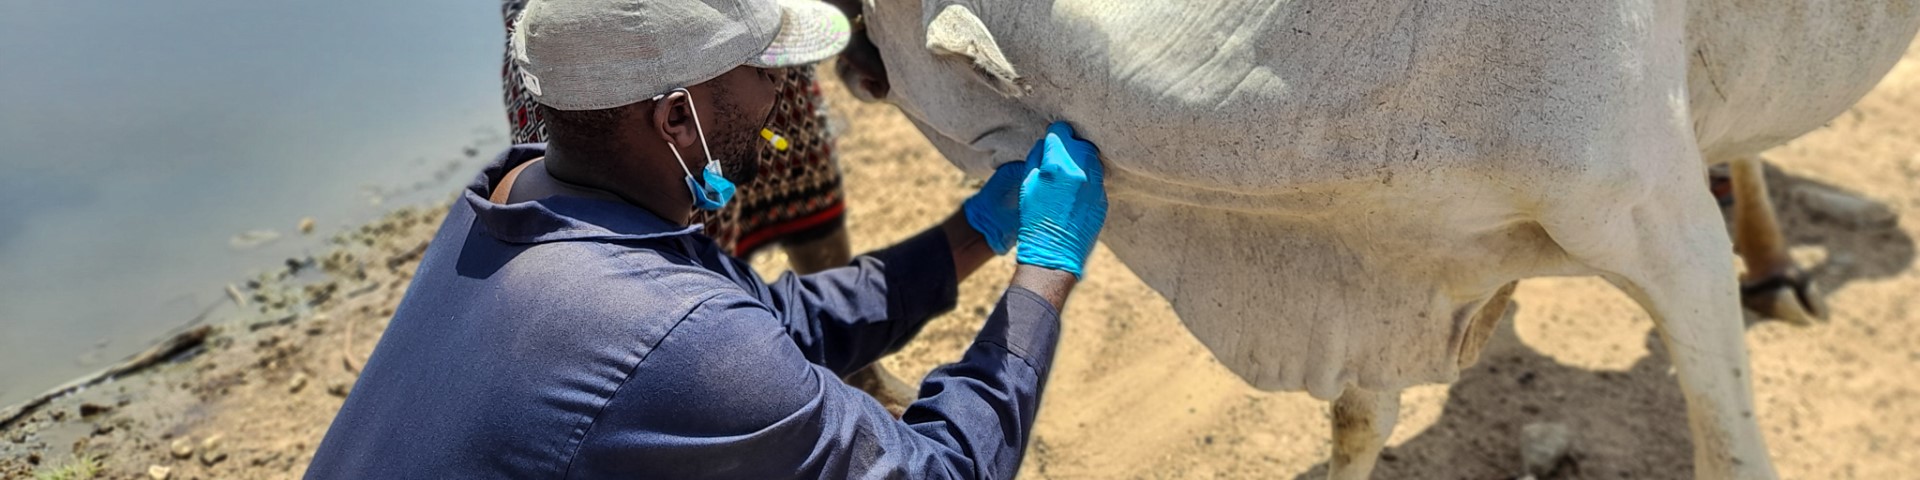 A man takes a blood sample from a cow.